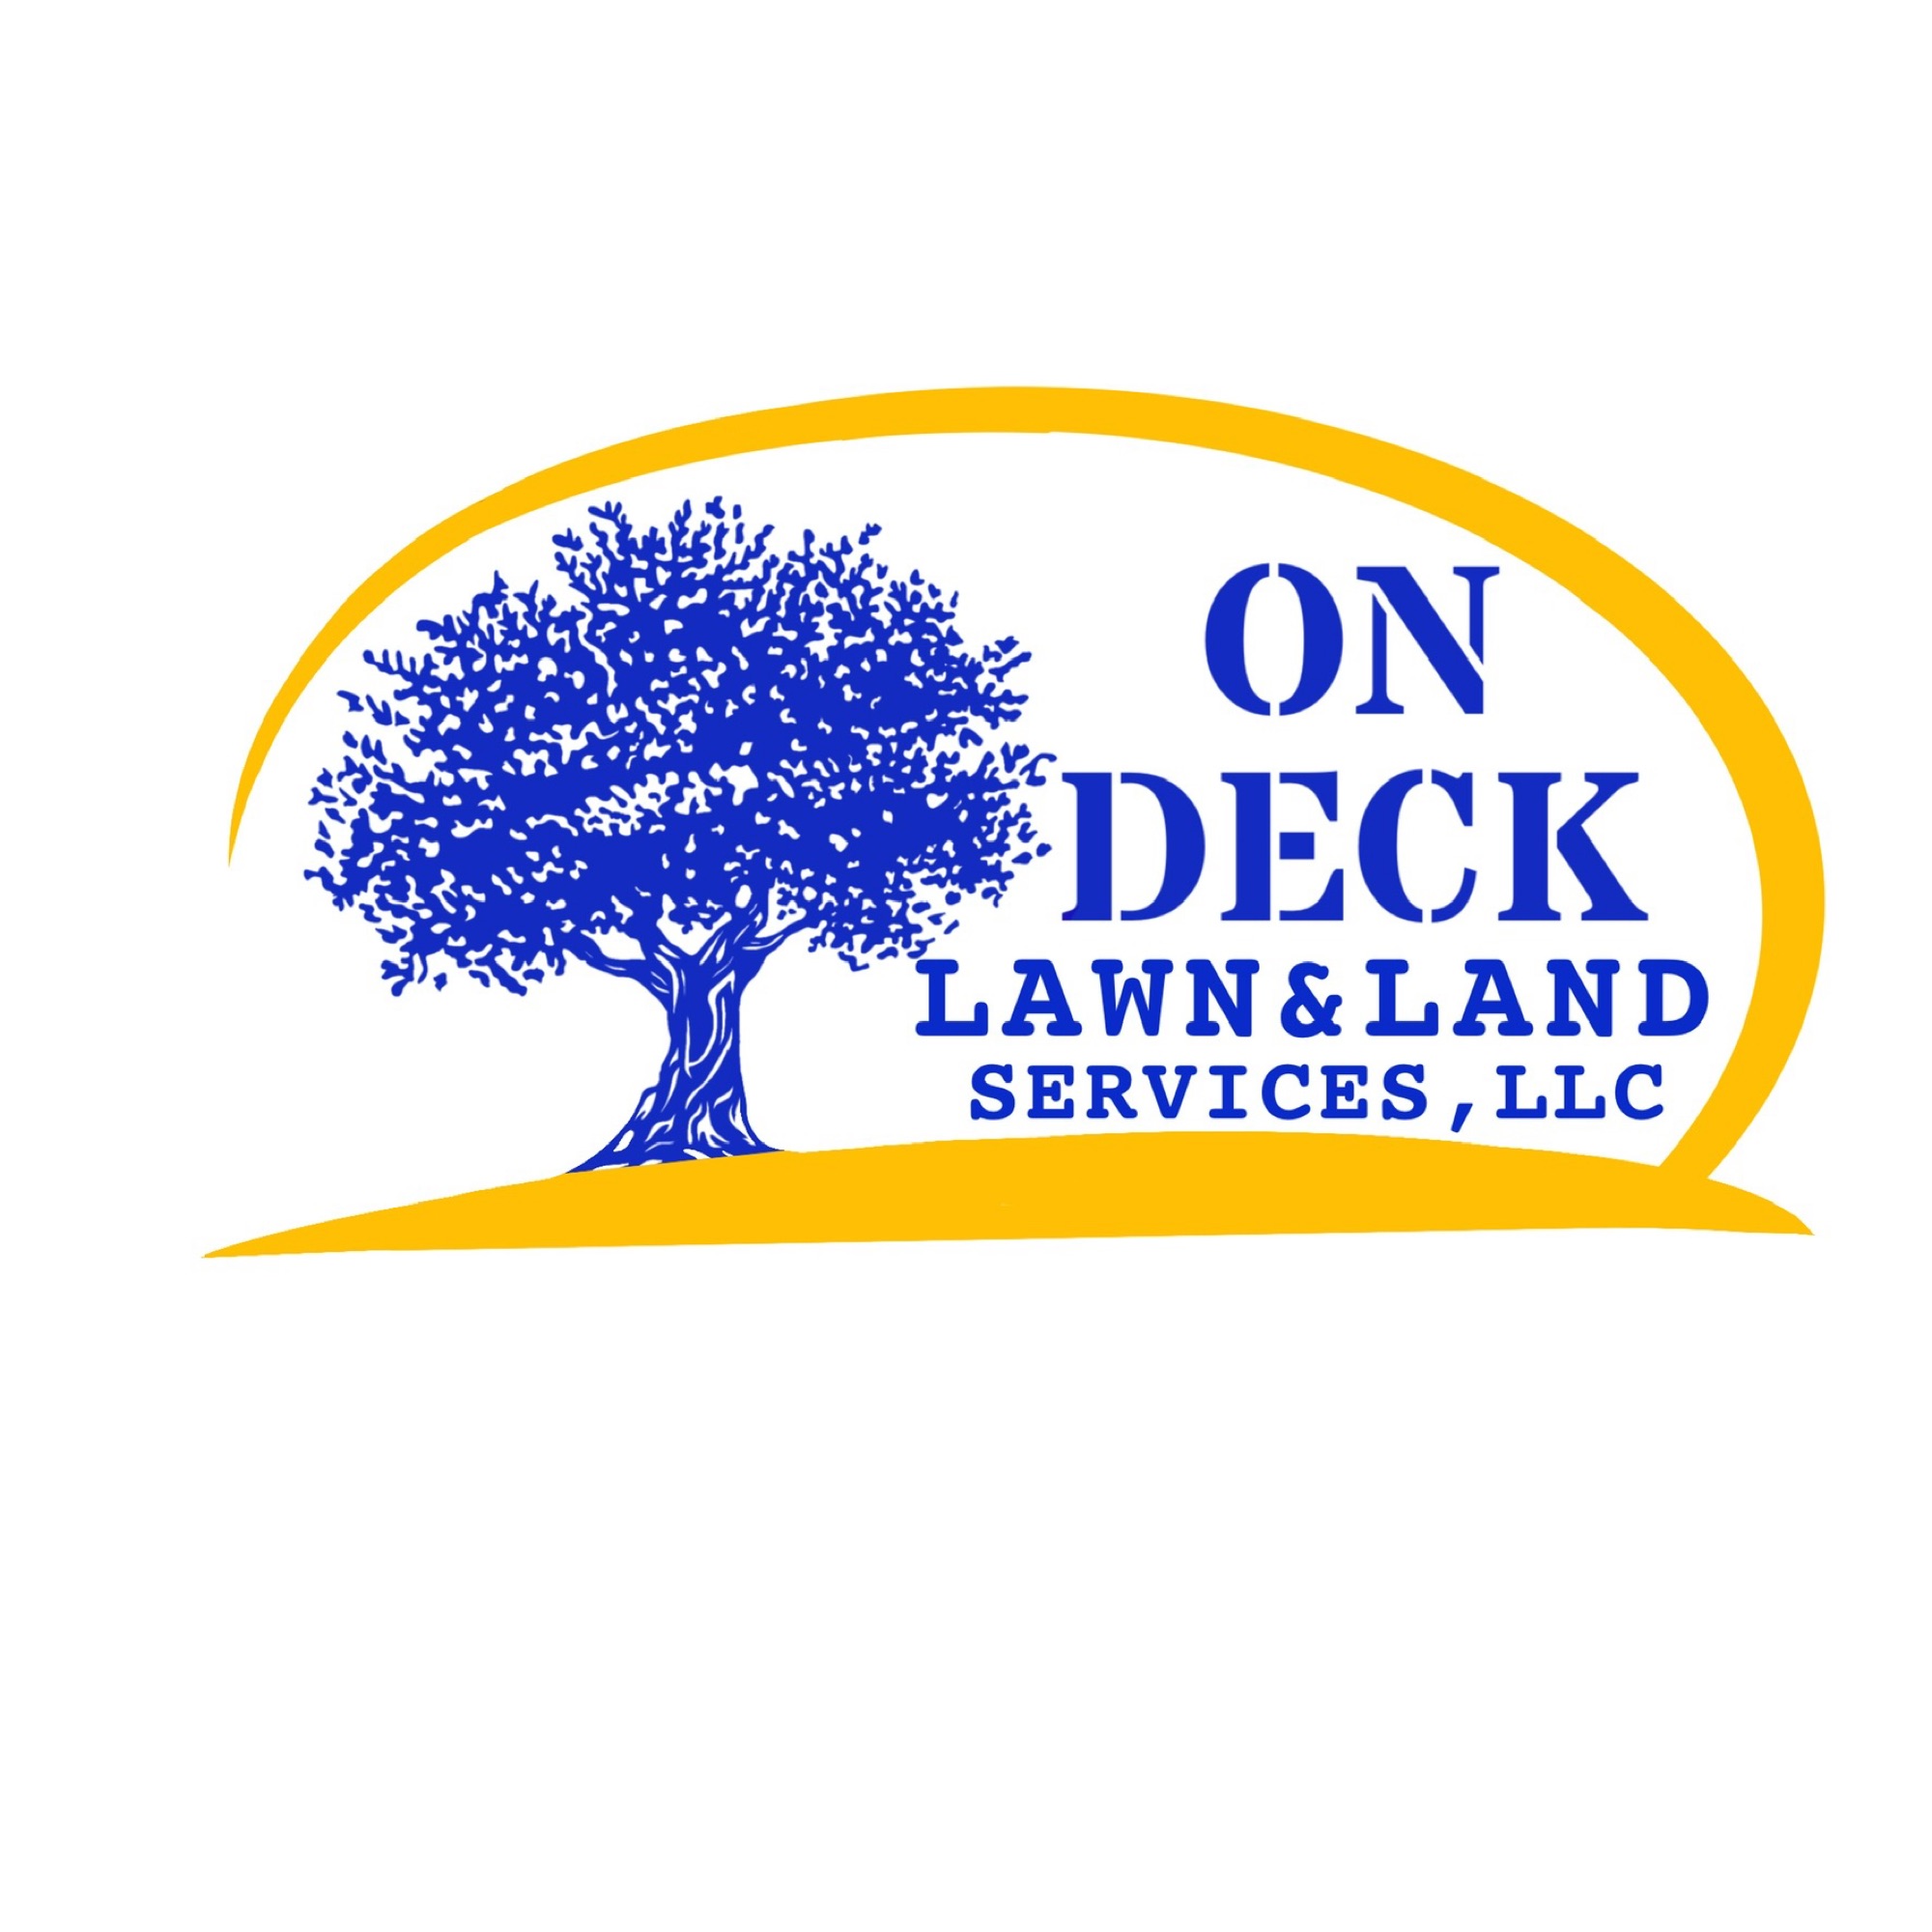 On Deck Lawn and Land Services, LLC Logo